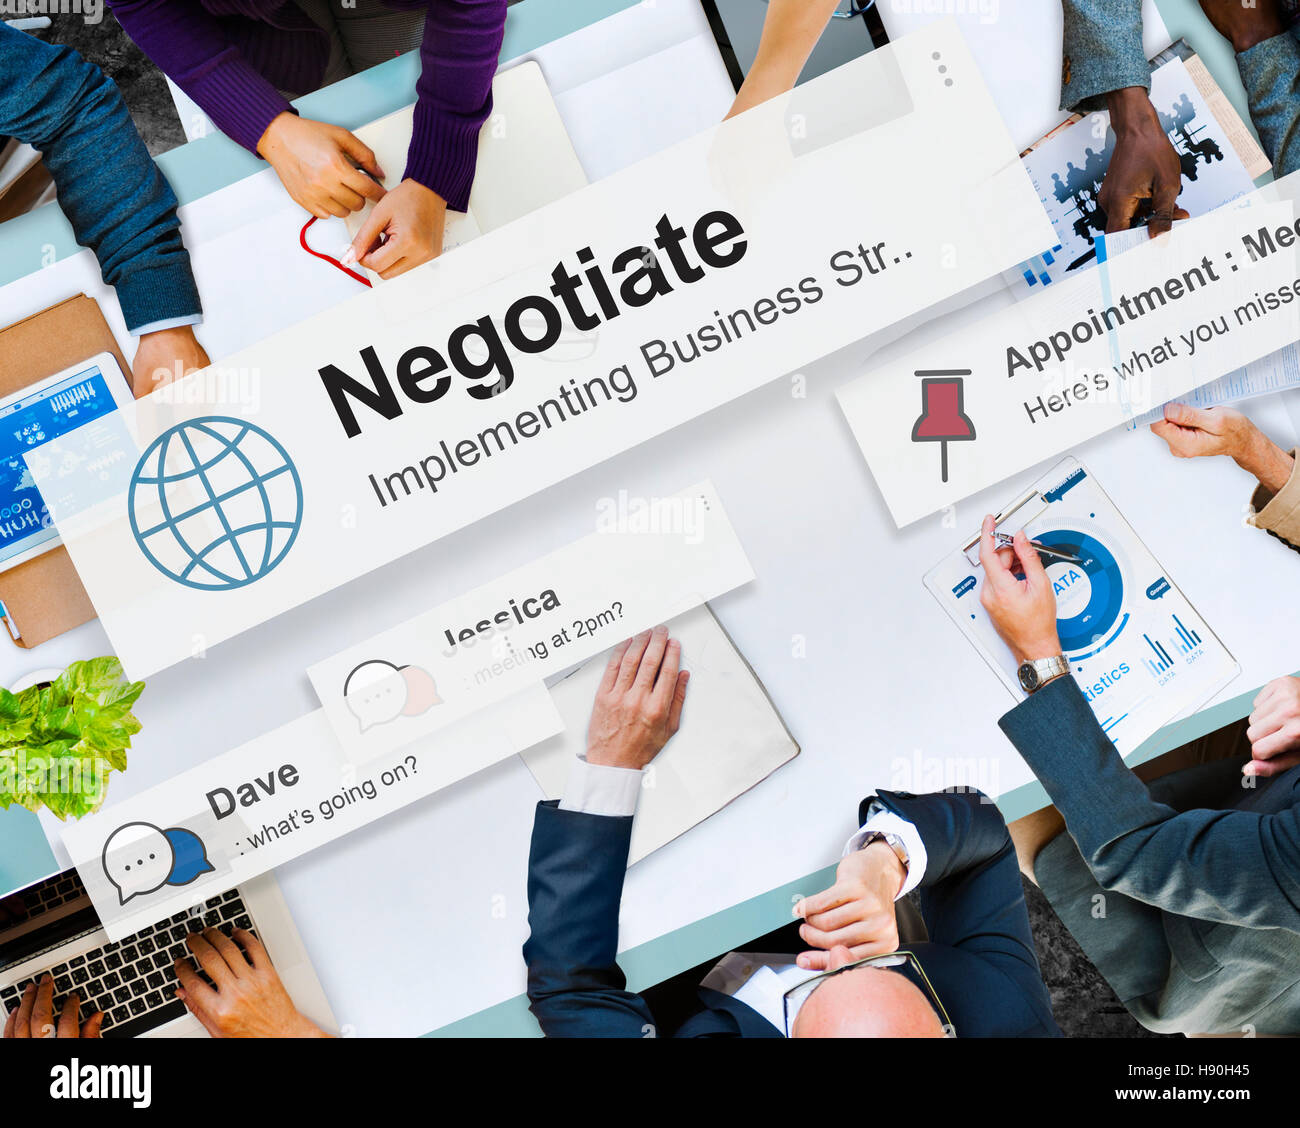 Negotiate Agreement Compromise Reconcile Concept Stock Photo